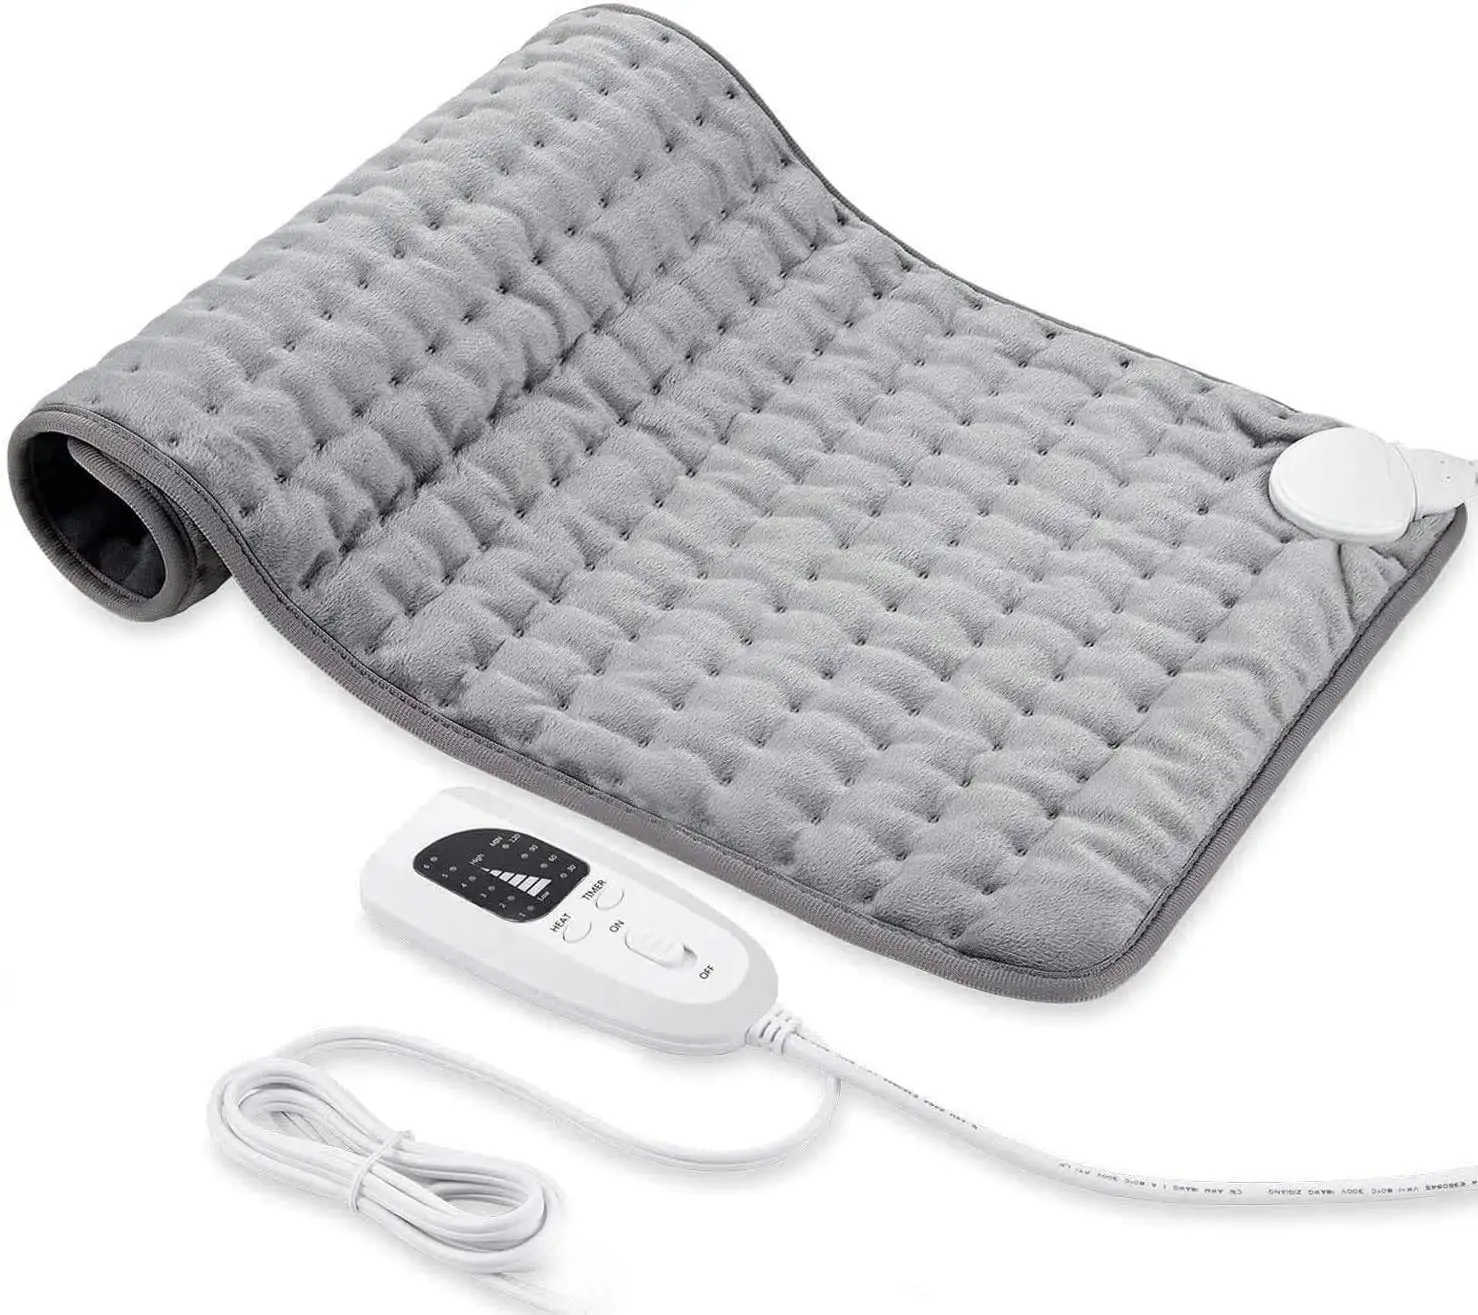 Factory Fast thermal Heating Neck and Shoulder back Pad electric Heating pad for Back, Shoulders, Abdomen, Legs, Arms